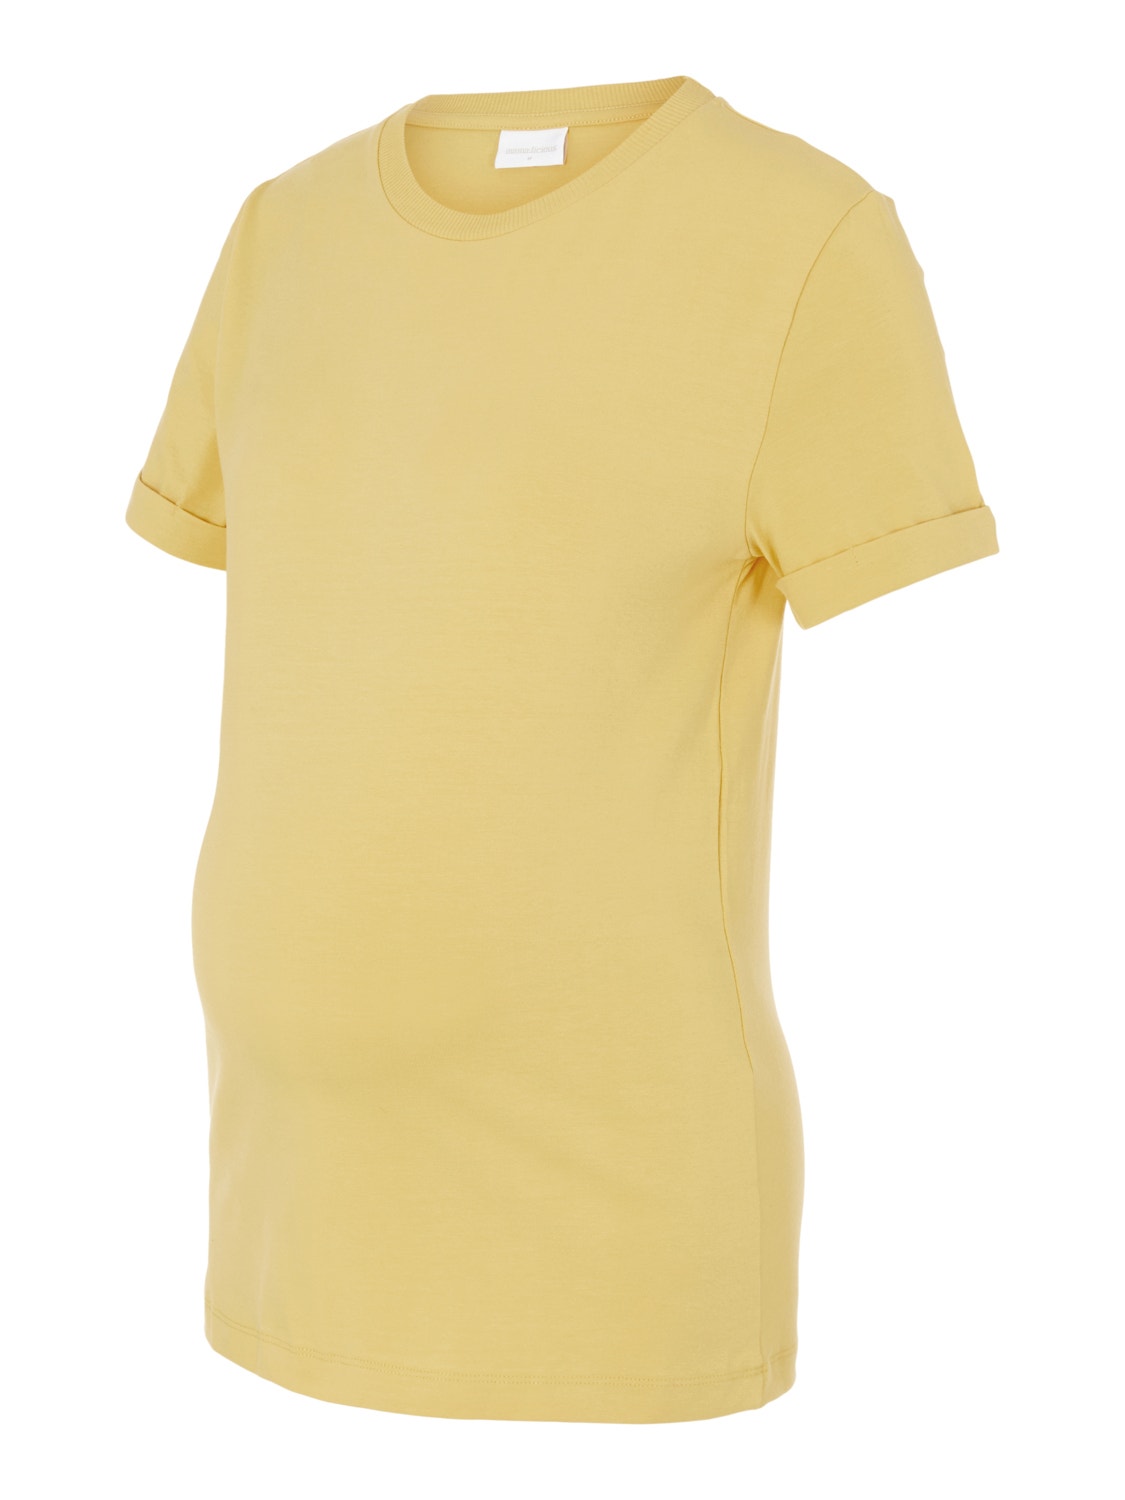 MAMA.LICIOUS Vente-t-shirt -Misted Yellow - 20015172